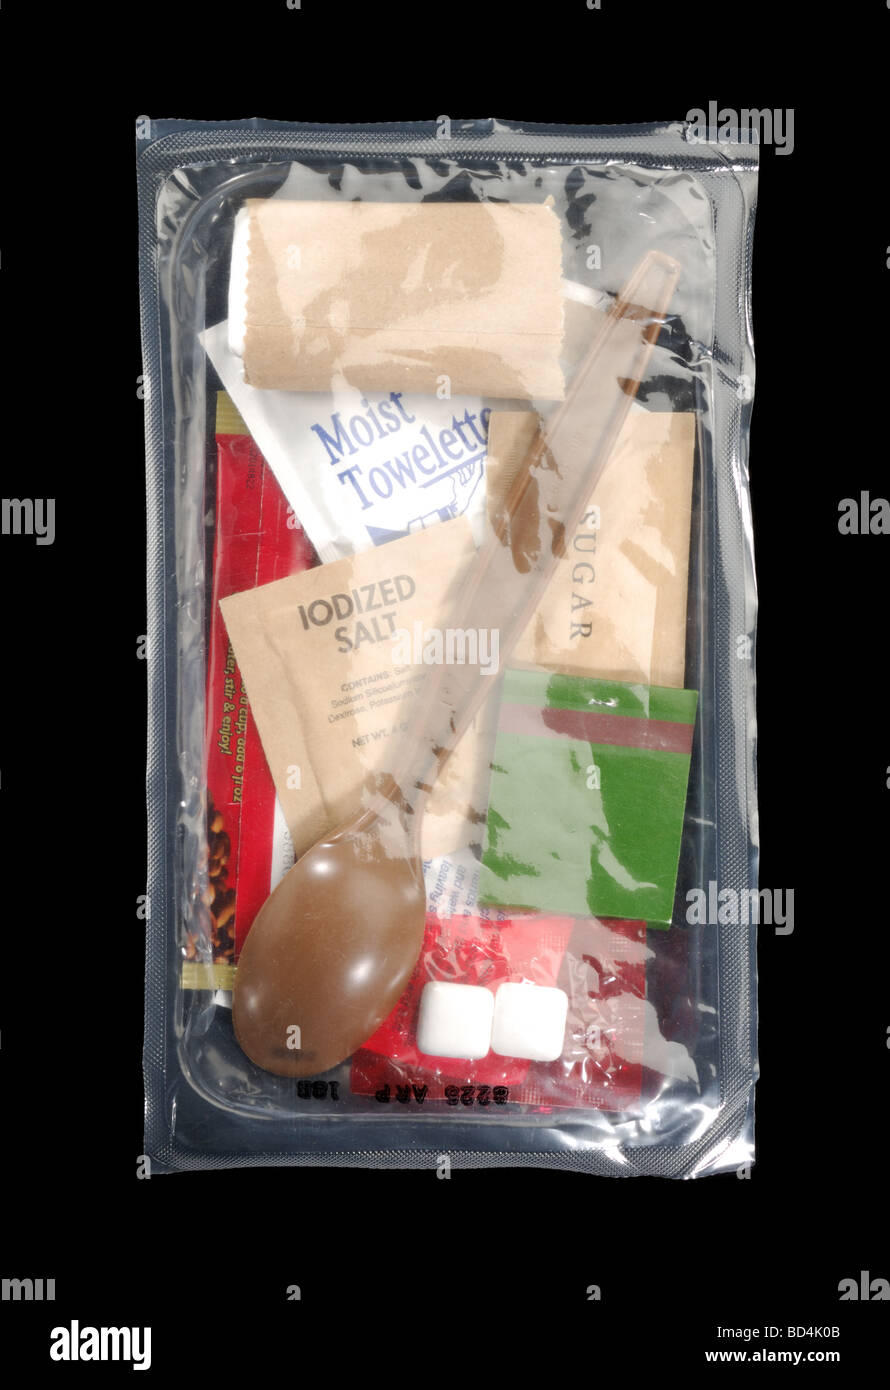 A military food ration packages with utensils and supplies on a black background Stock Photo